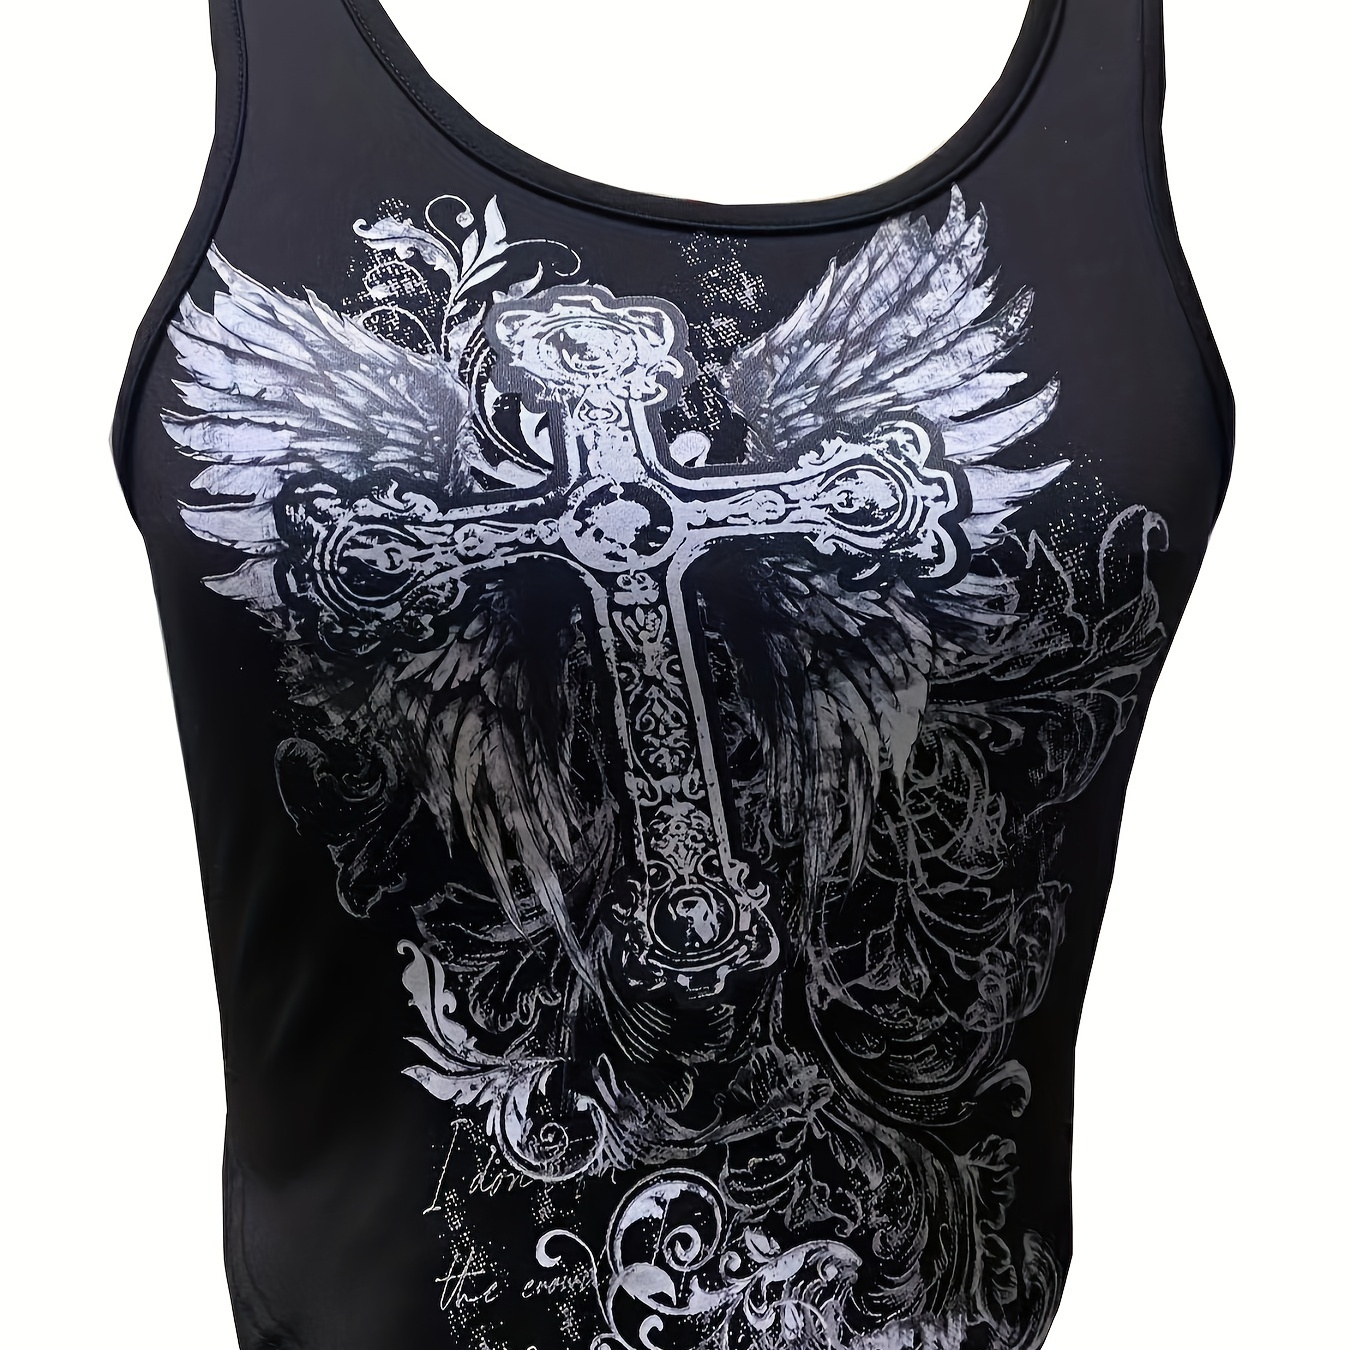 

Gothic Winged Cross Print Tank Top, Vintage Sleeveless Tank Top For Summer, Women's Clothing For Grunge Style